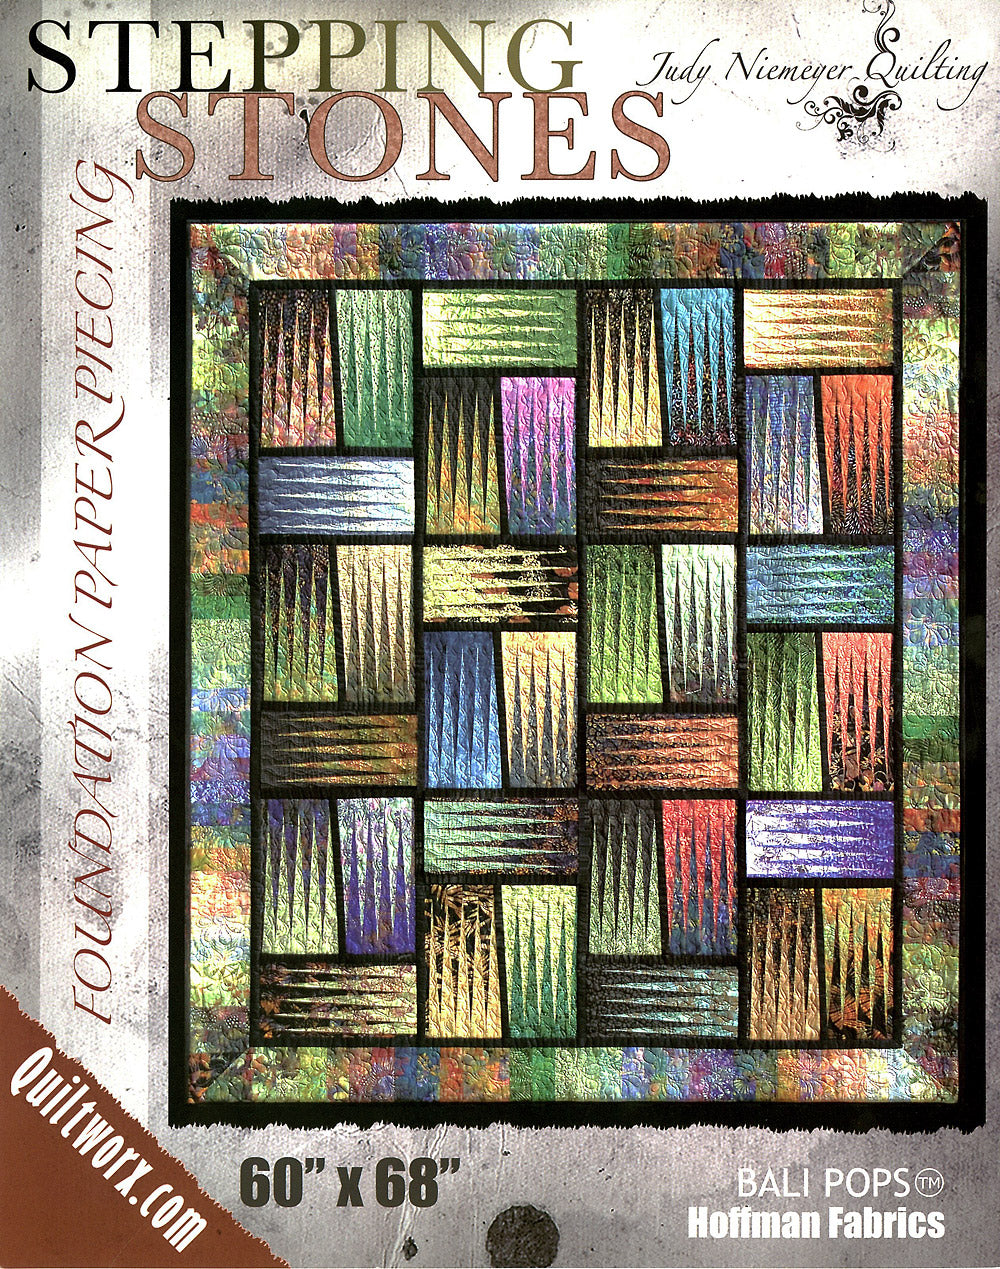 Stepping Stones Foundation Paper Pieced Quilt Pattern by Judy Niemeyer of Quiltworx